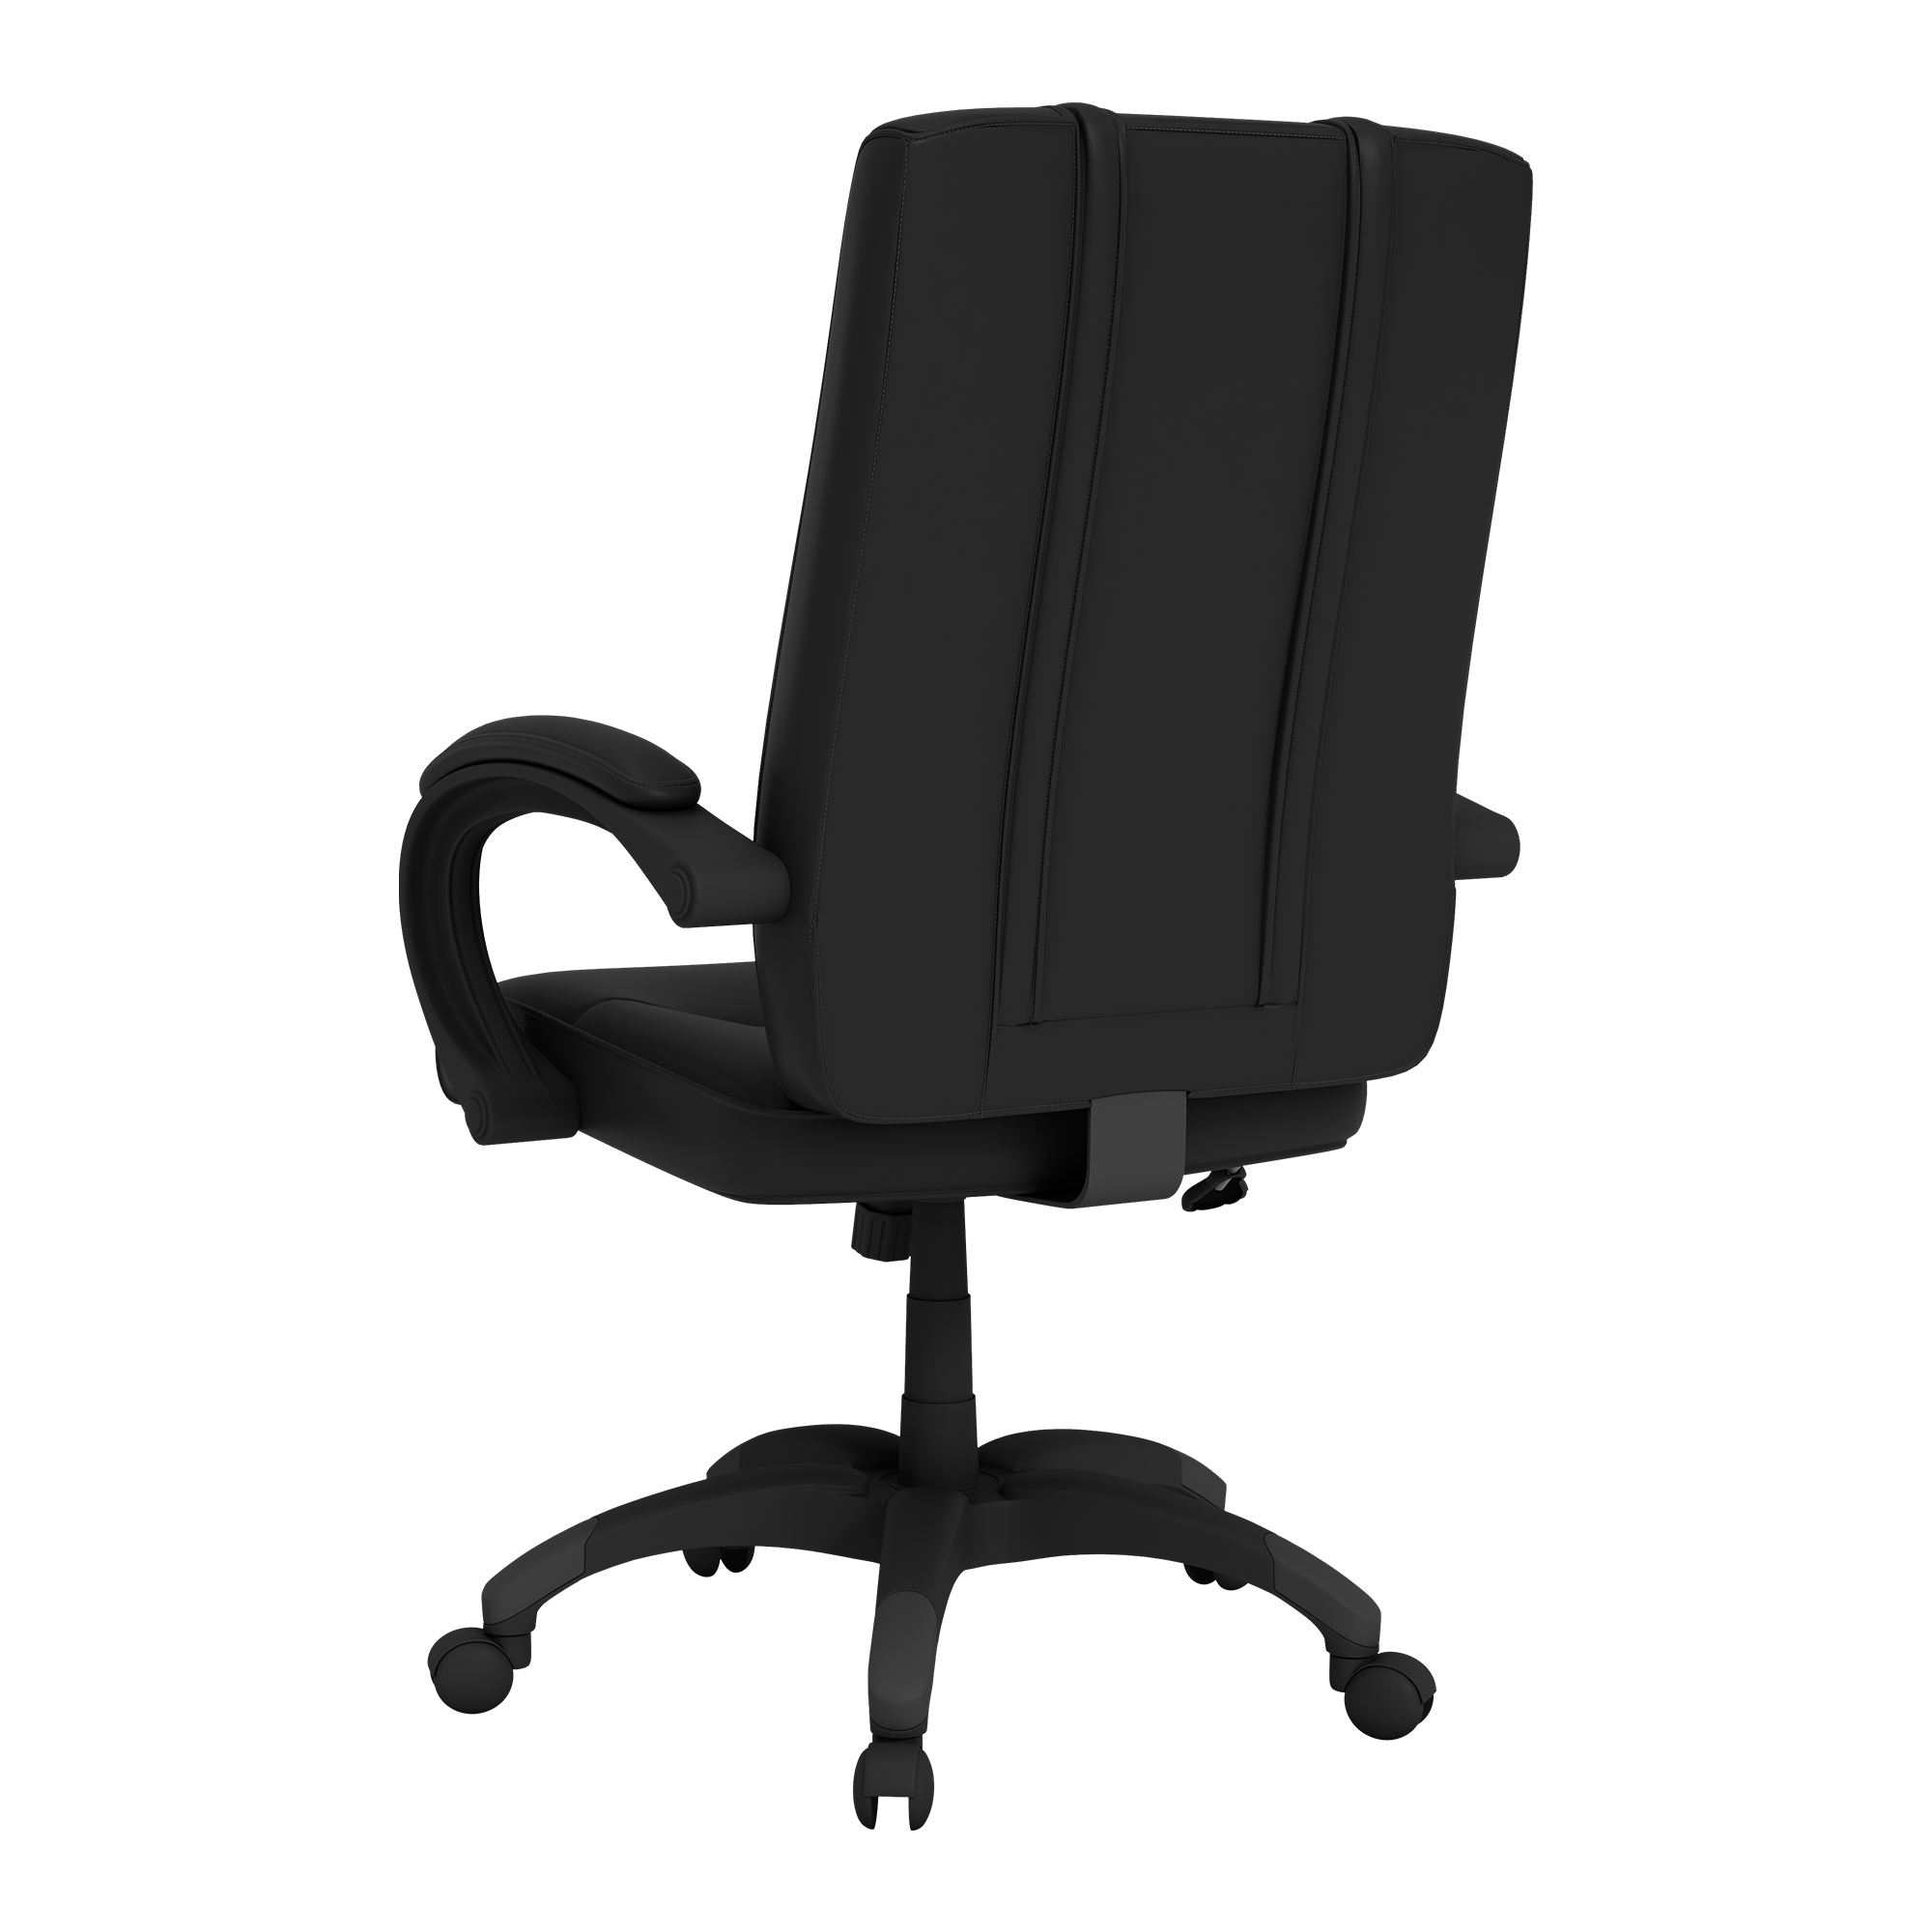 Office Chair 1000 with St Louis Cardinals Cooperstown Secondary